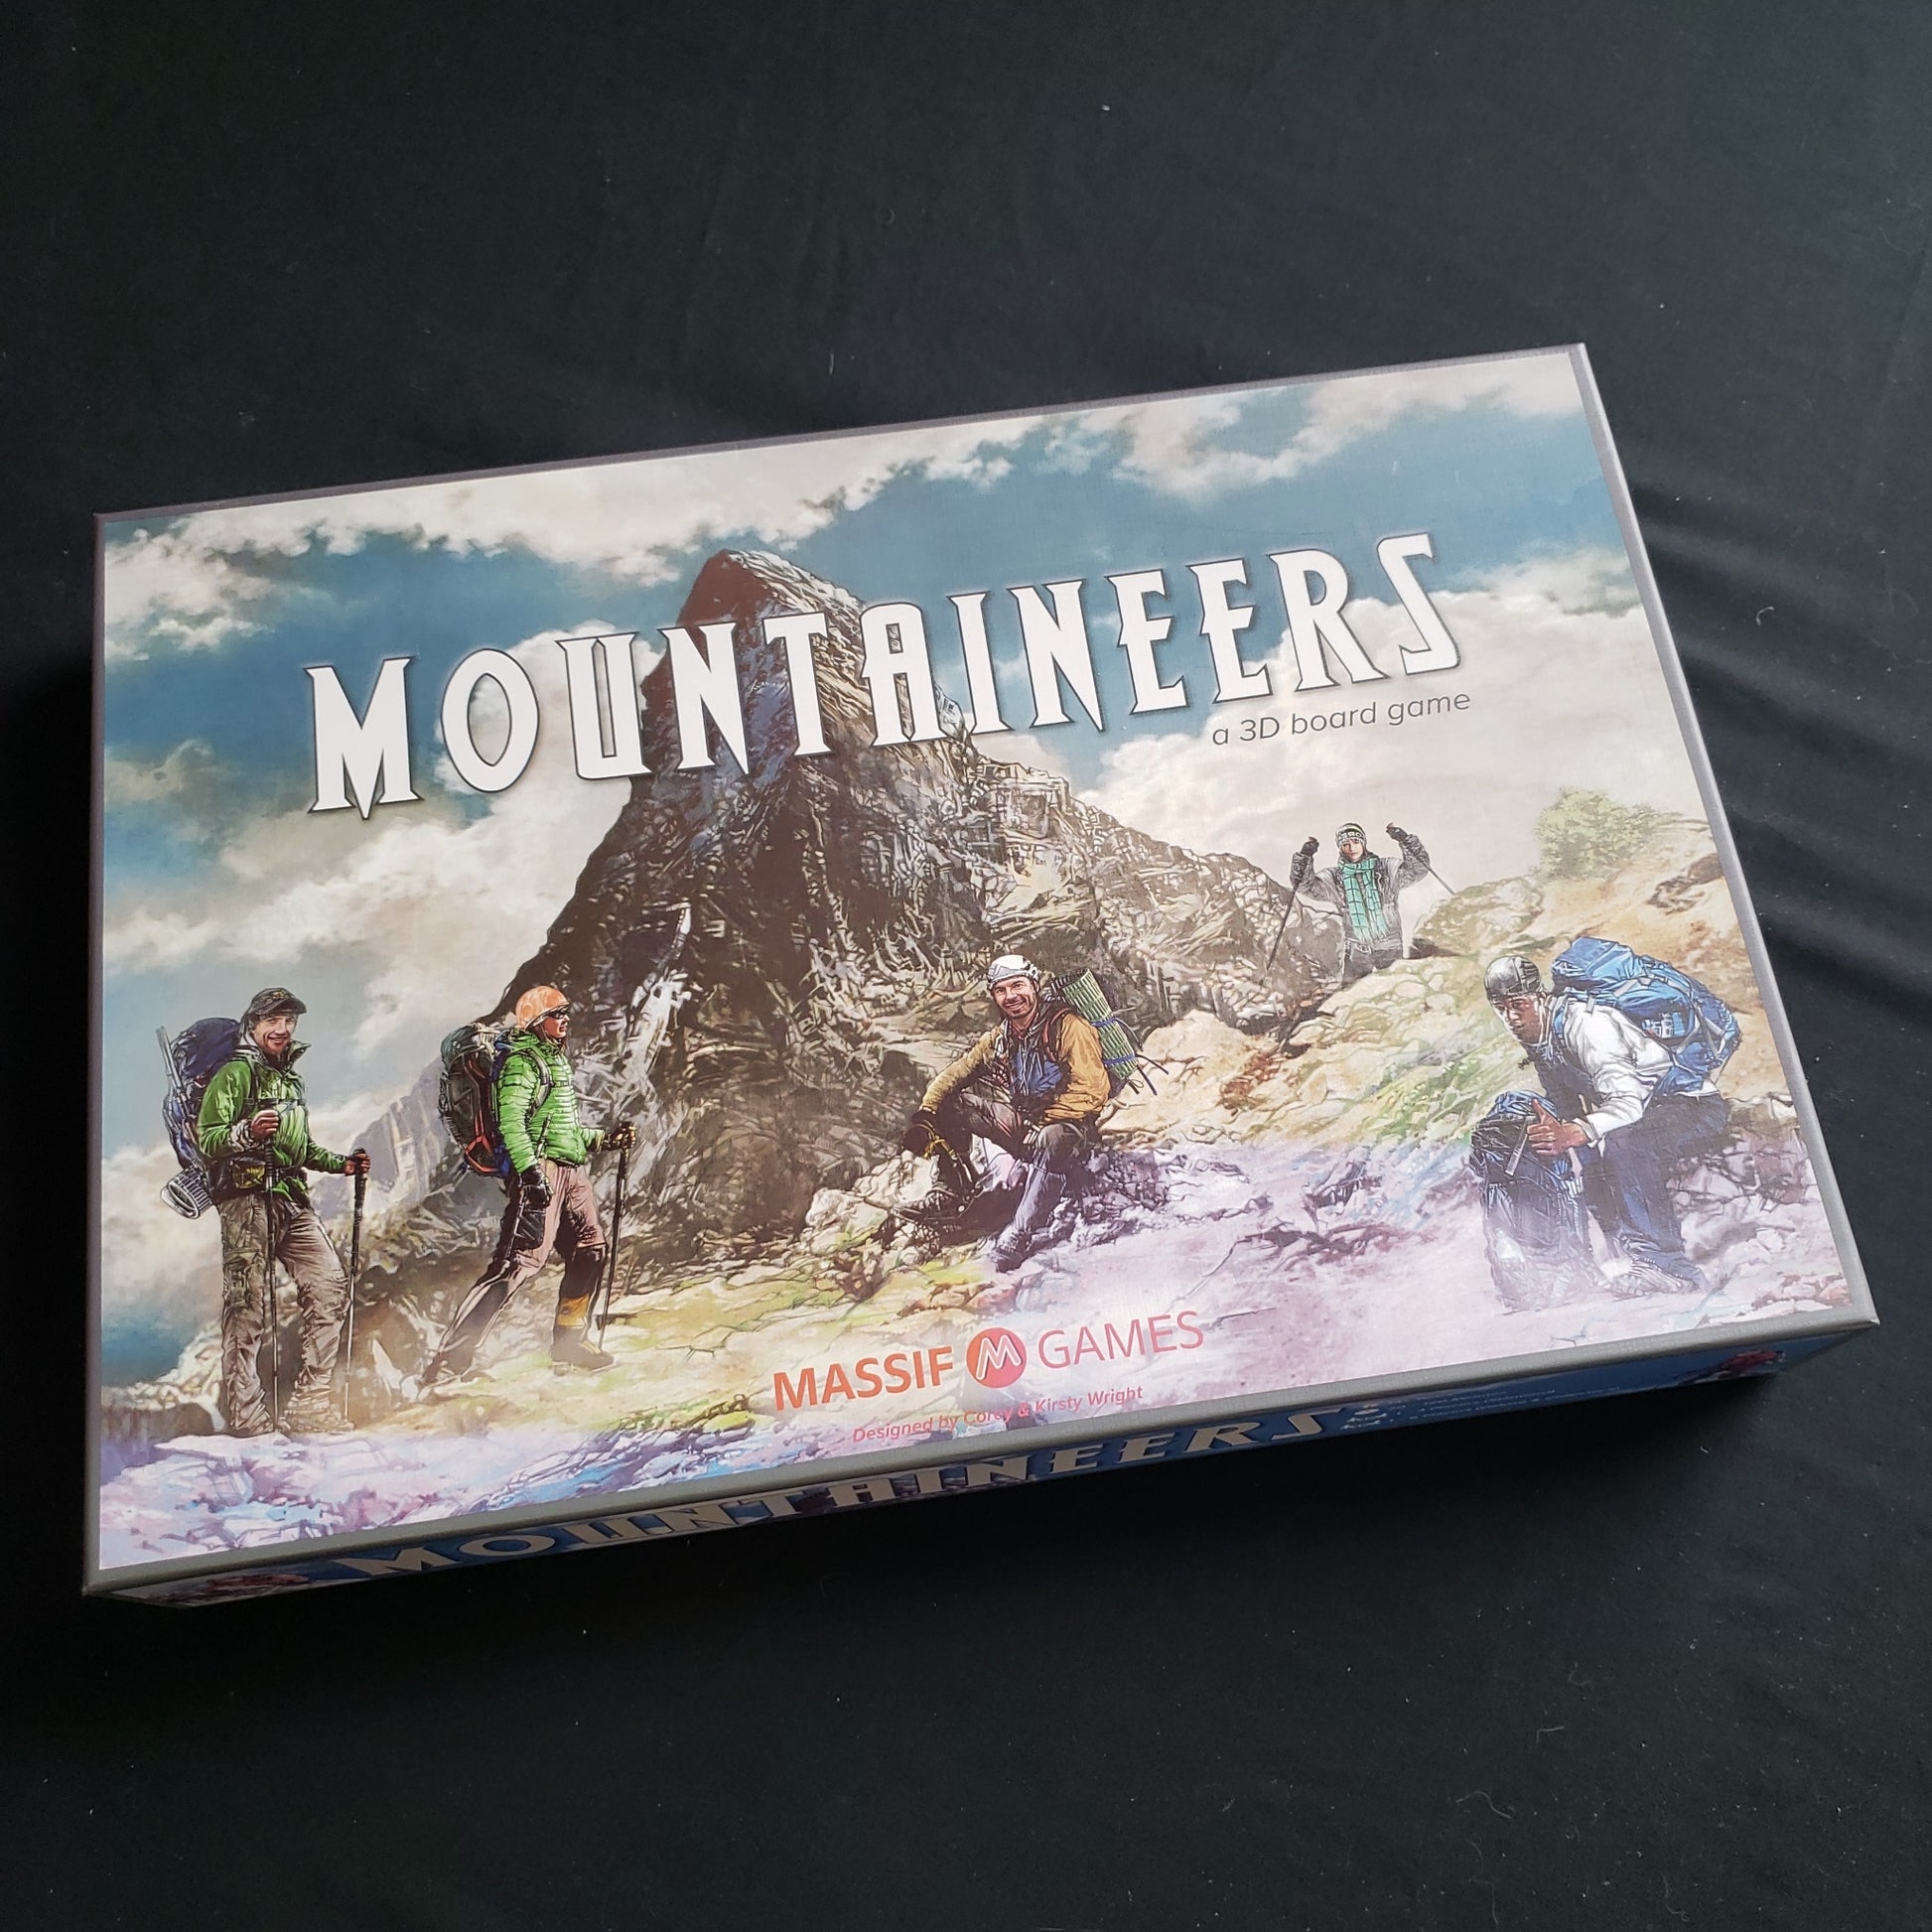 Image shows the front cover of the box of the Mountaineers board game